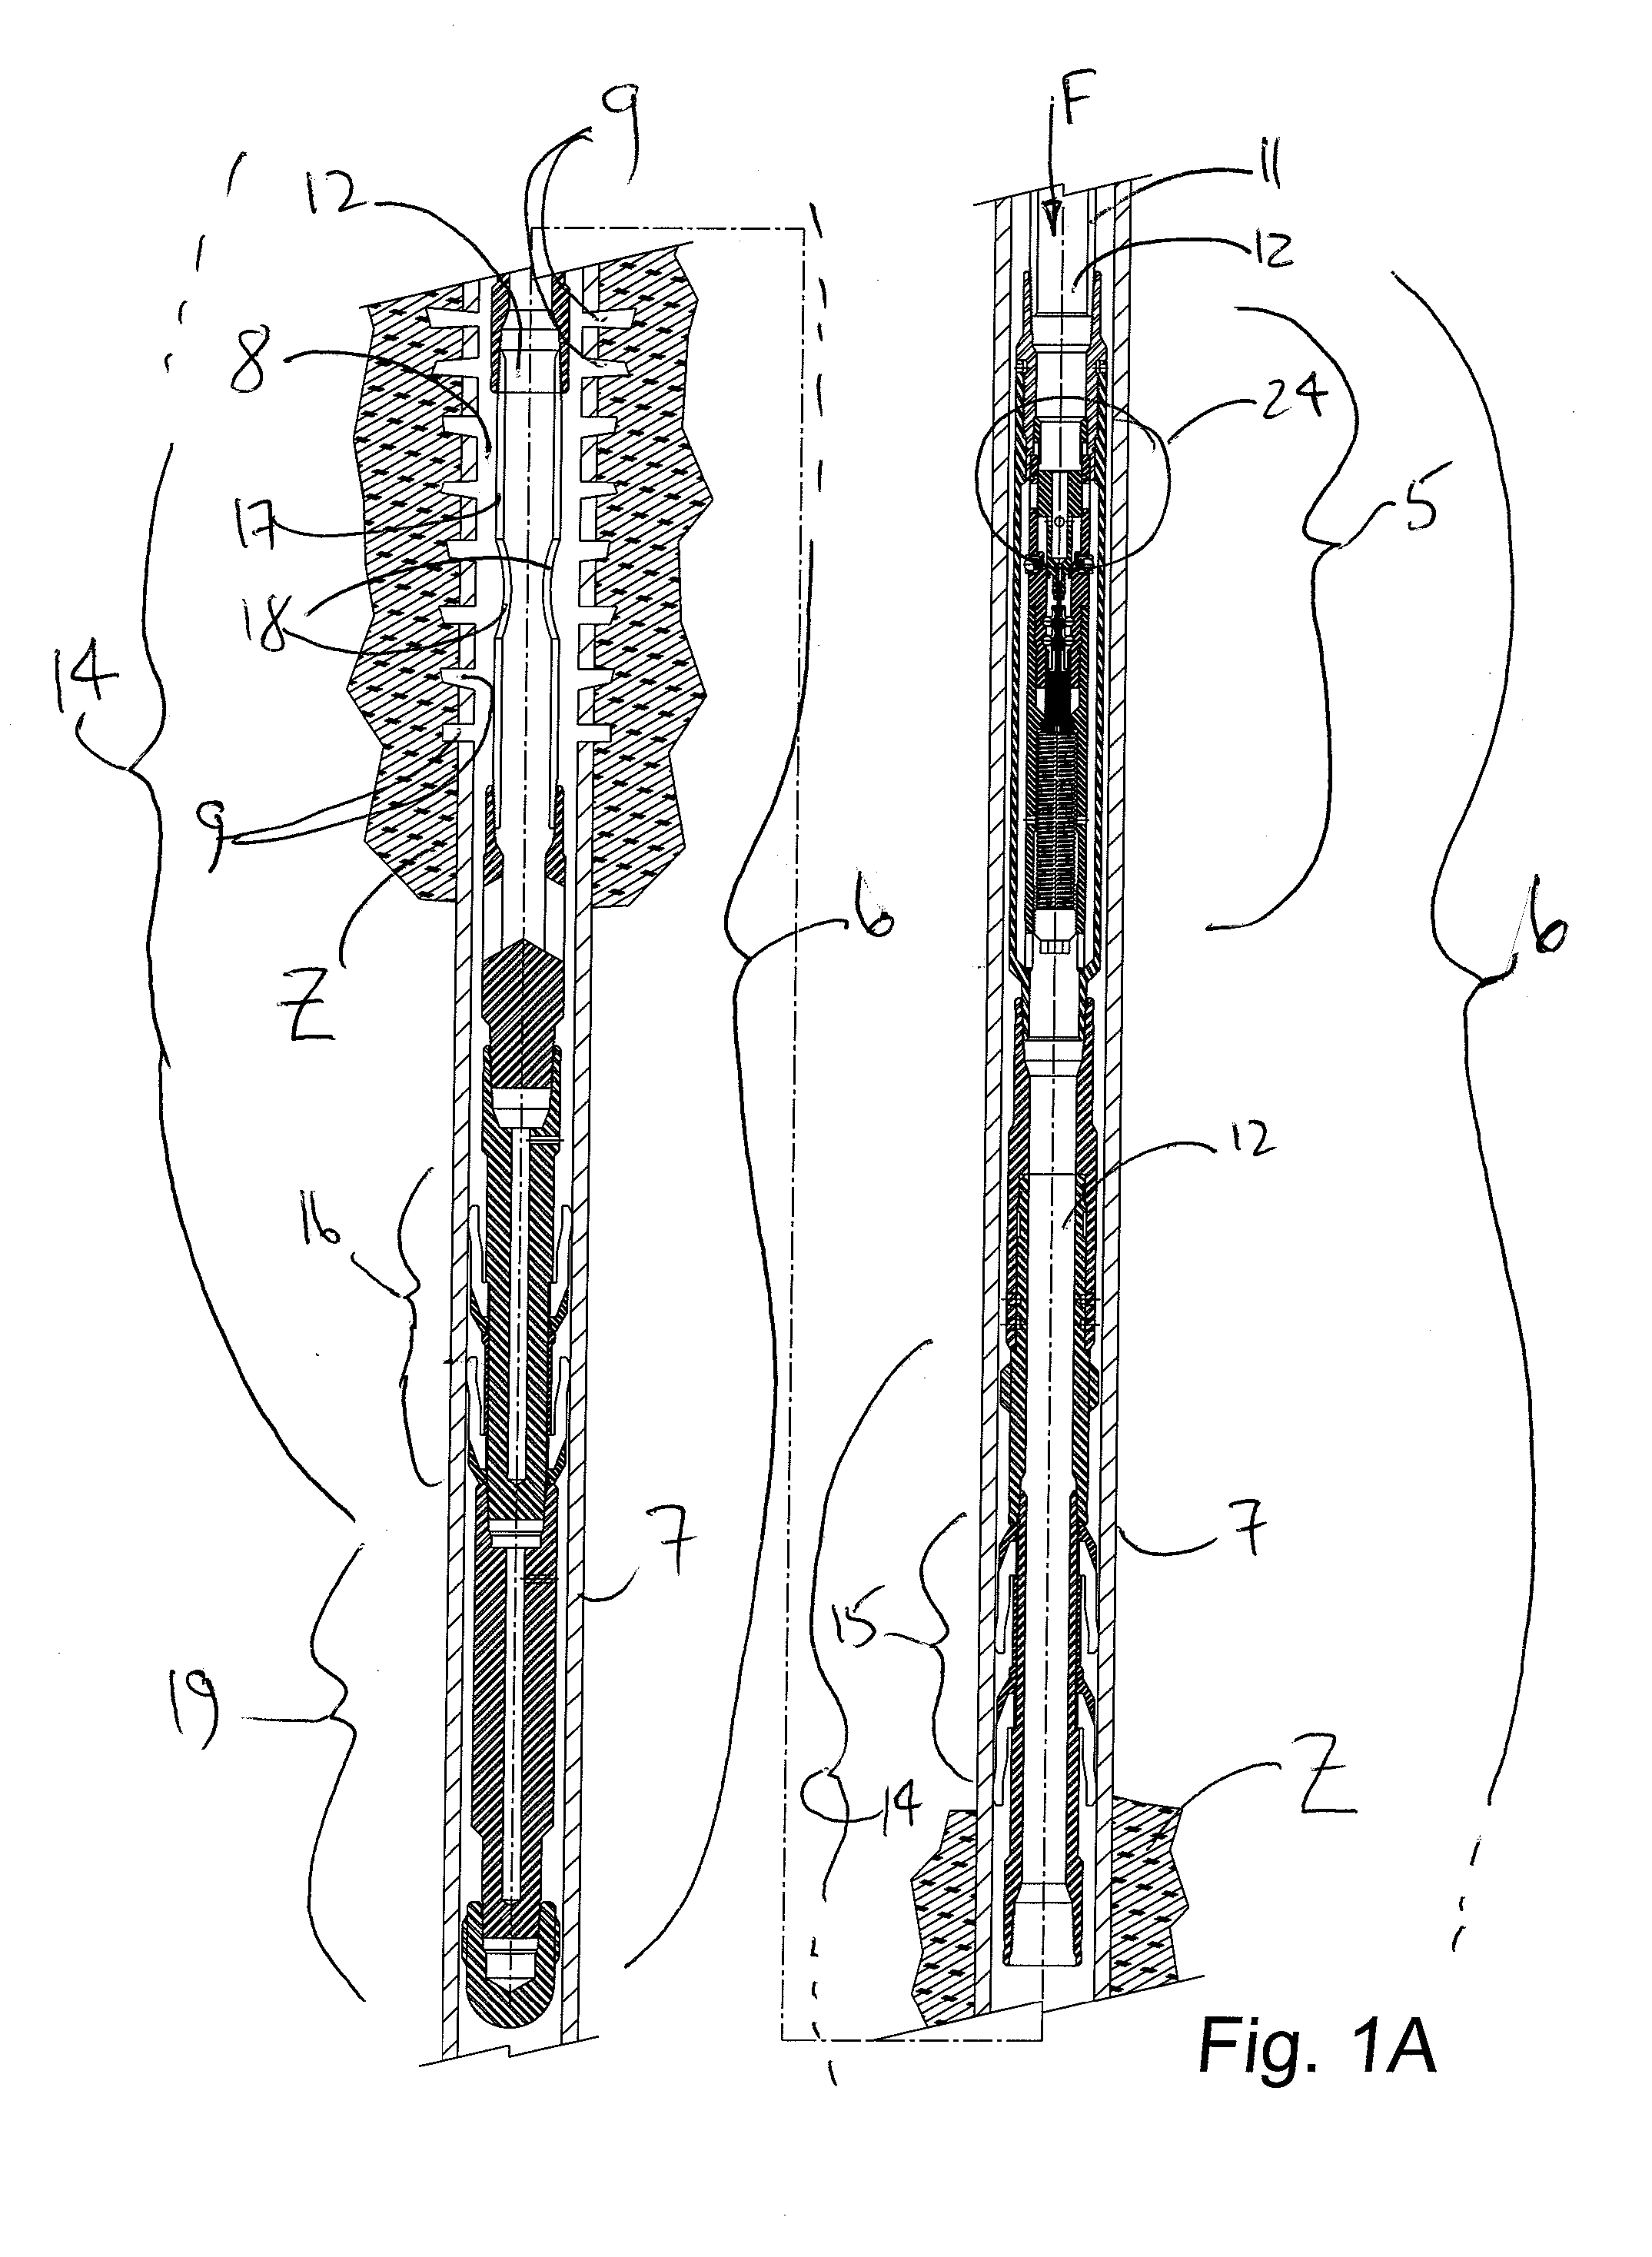 Shock-release fluid fracturing method and apparatus